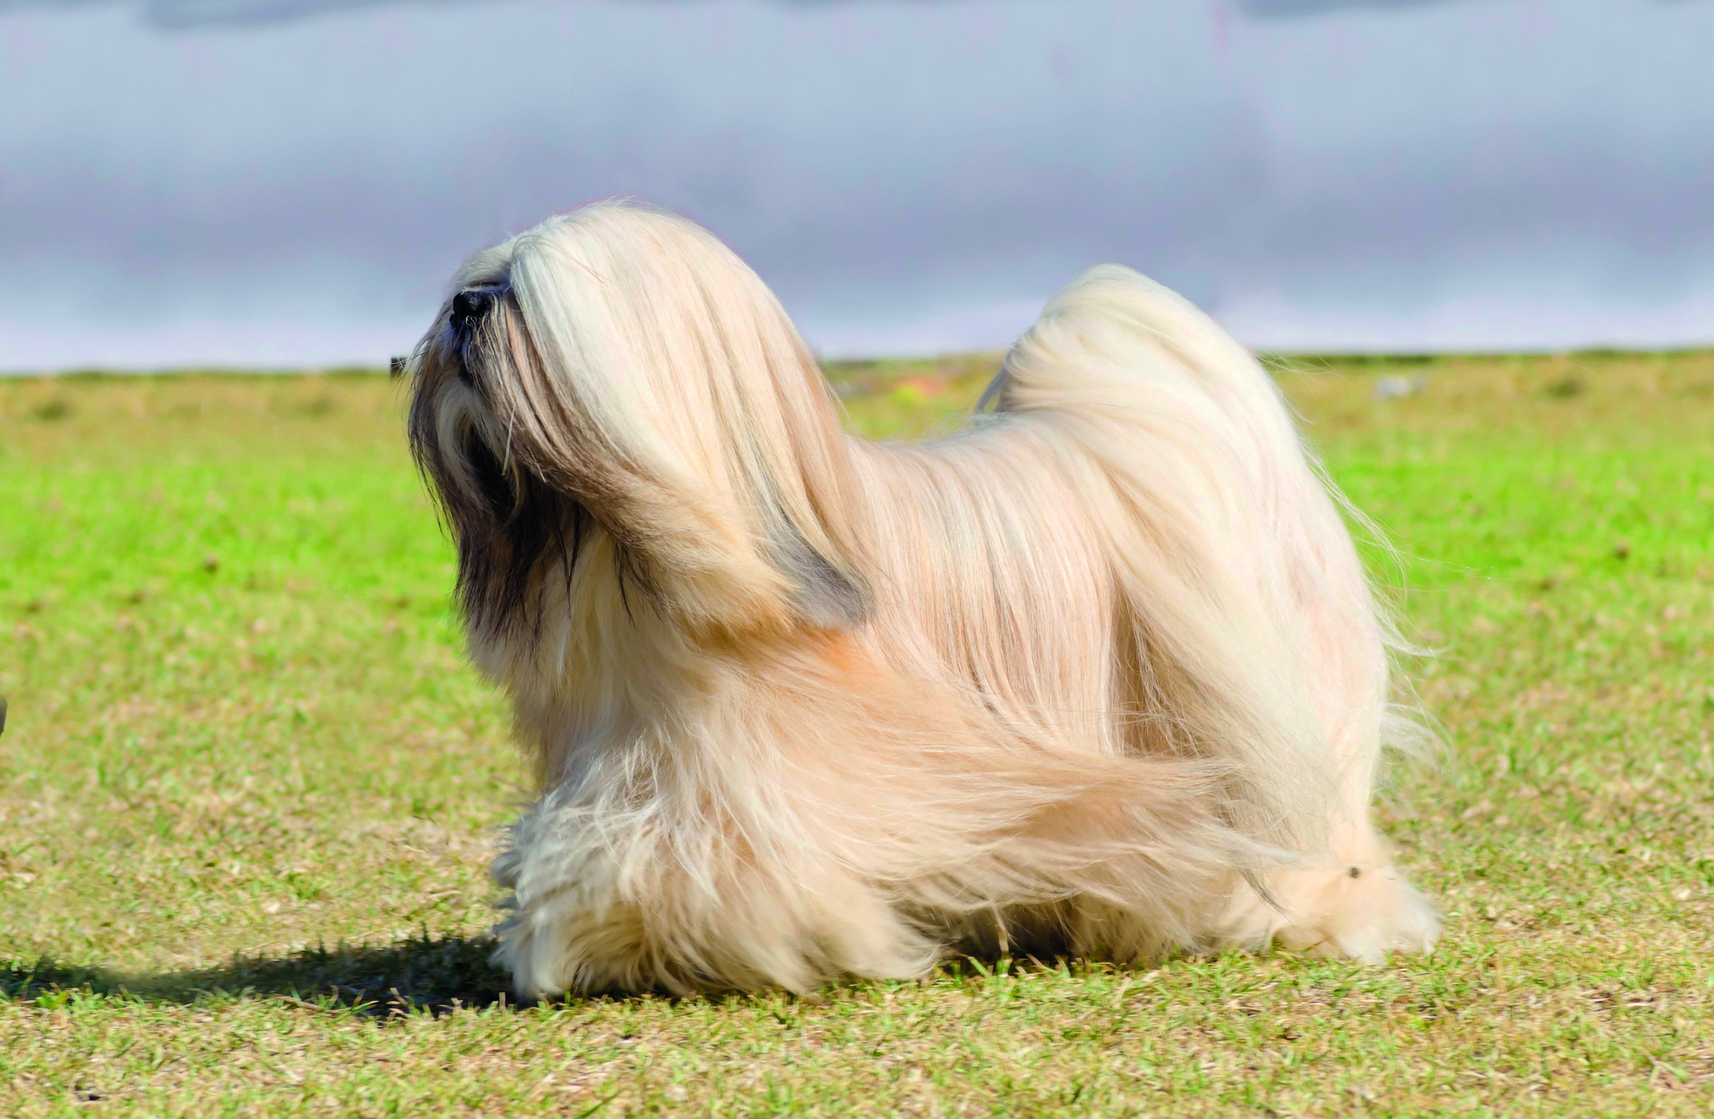 A small young light tan, fawn, beige, gray and white Lhasa Apso dog with a long silky coat running on the grass. The long haired, bearded Lasa dog has heavy straight long coat and is a companion dog.